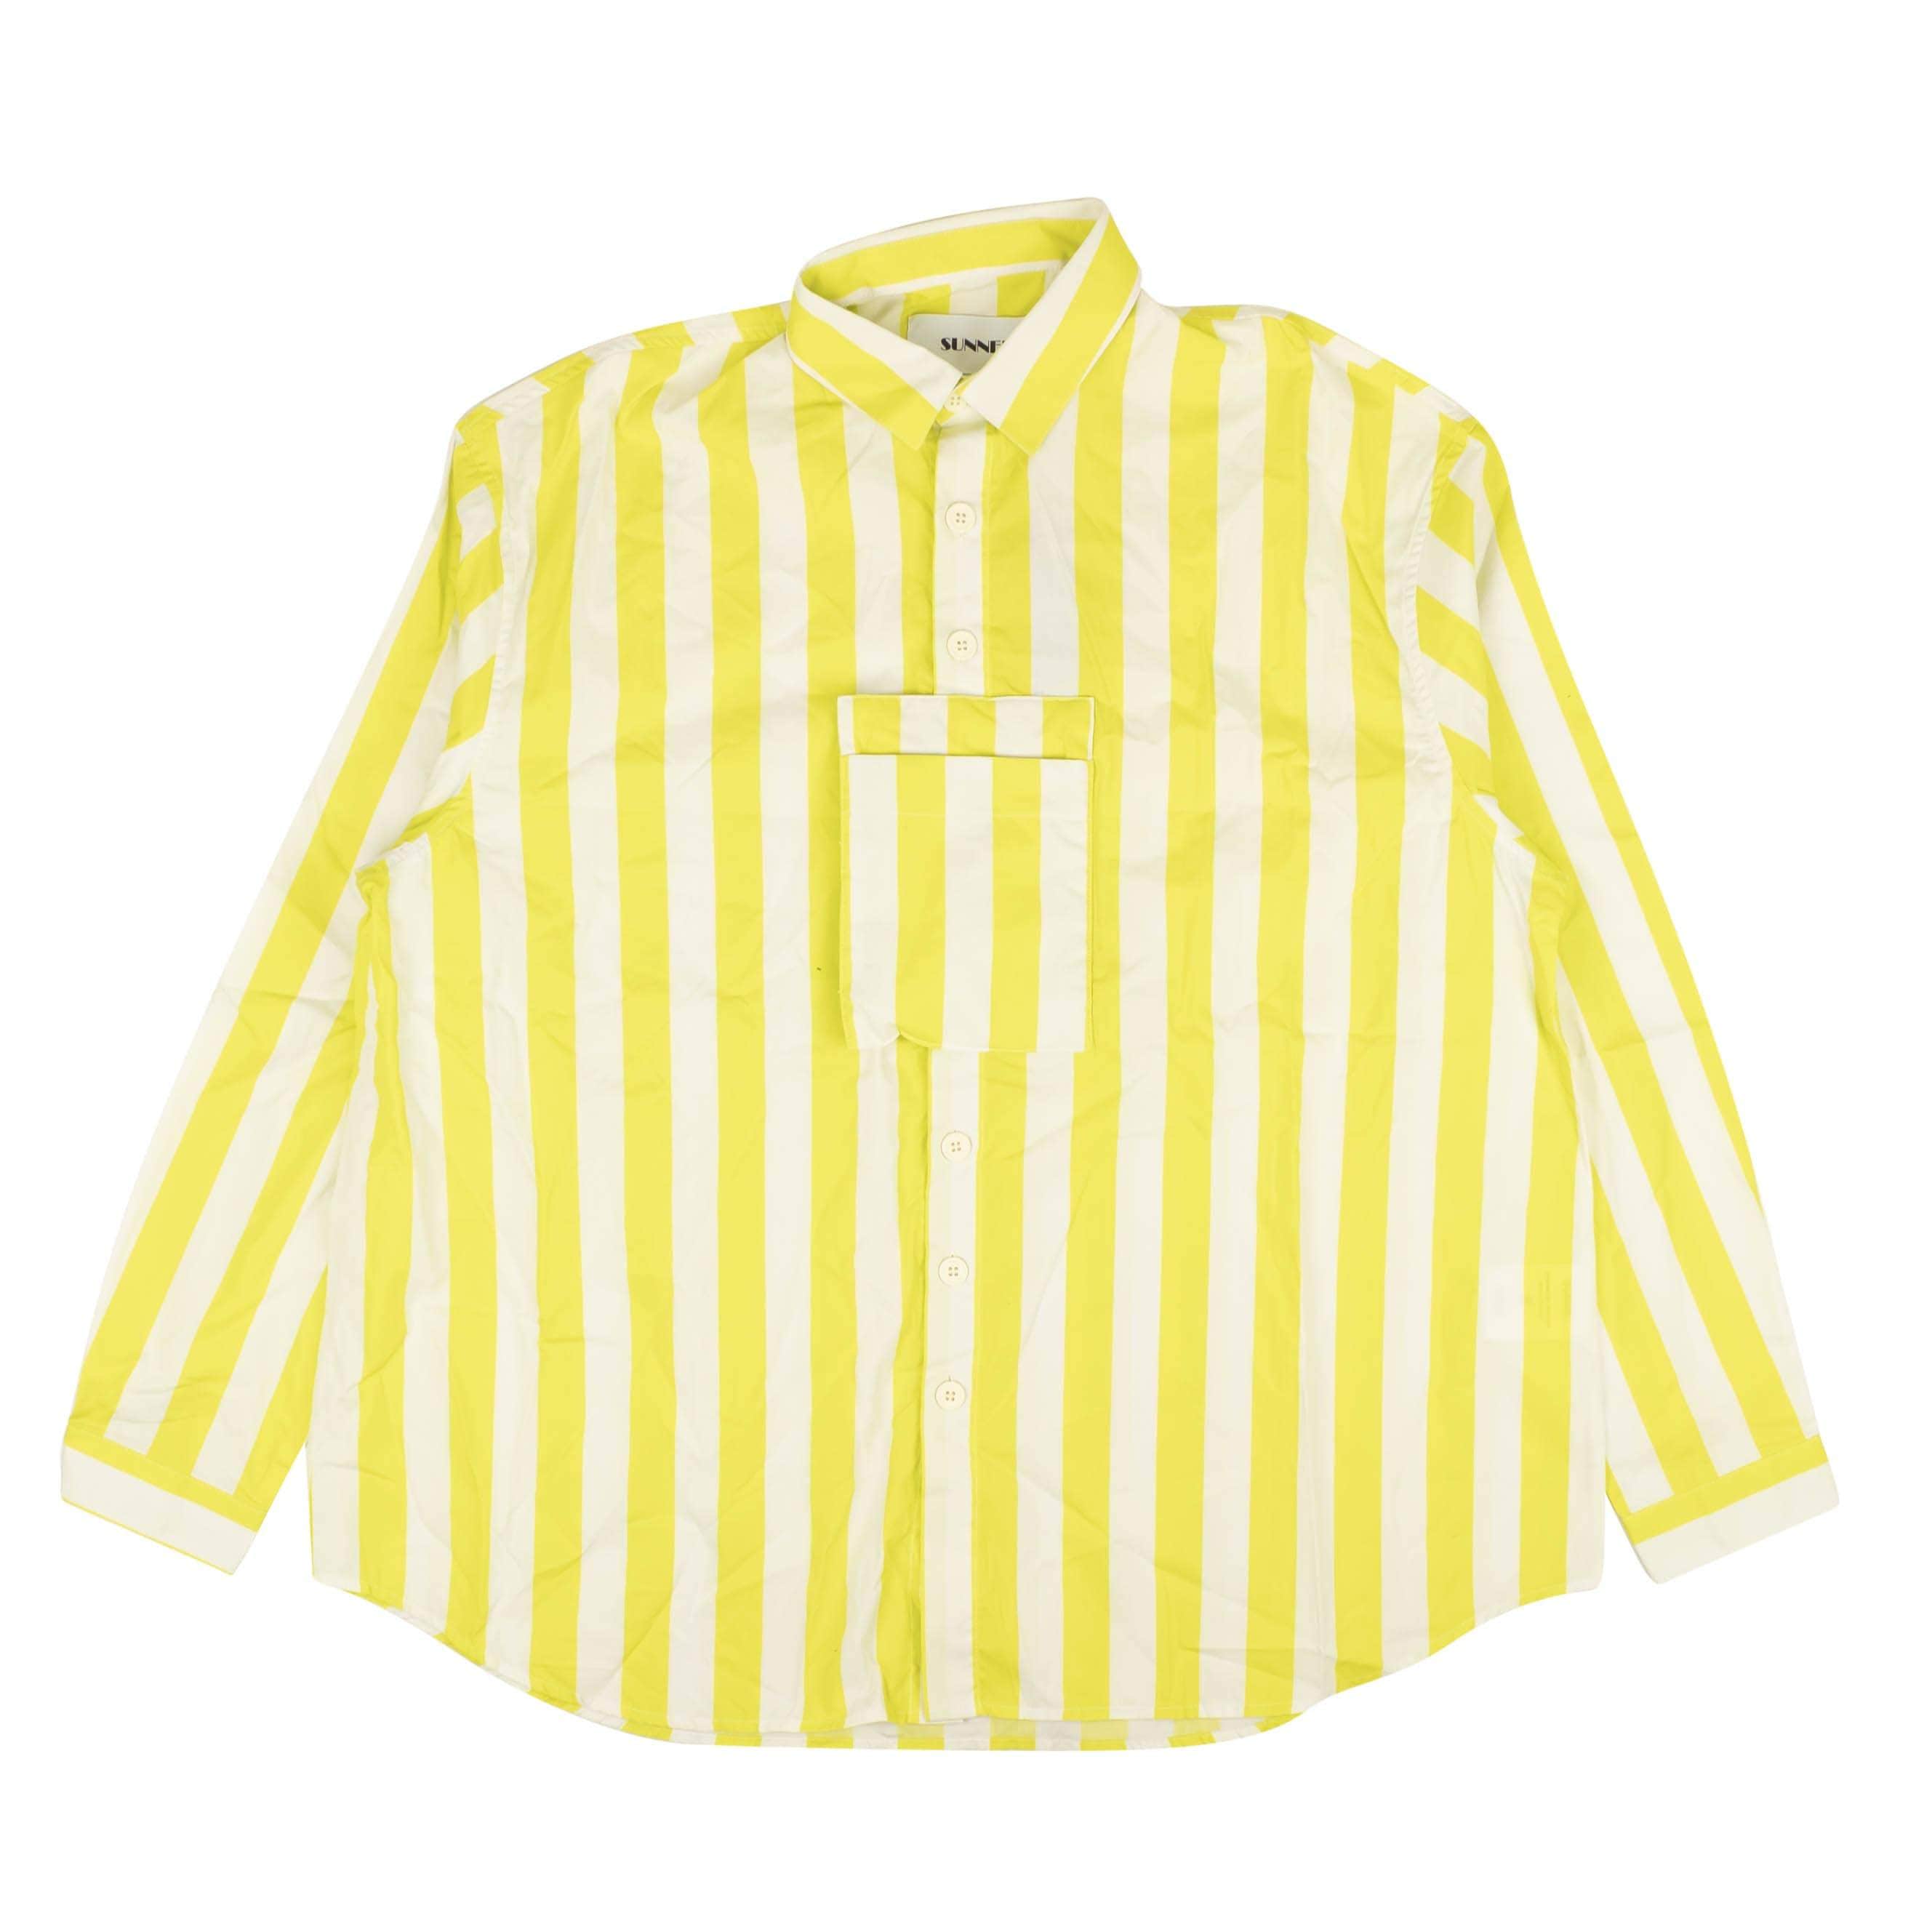 Inactive channelenable-all, chicmi, couponcollection, gender-mens, main-clothing, mens-shoes, shop375, under-250 S Yellow White Striped Long Sleeve Button Down Shirt 87AB-SN-1004/S 87AB-SN-1004/S